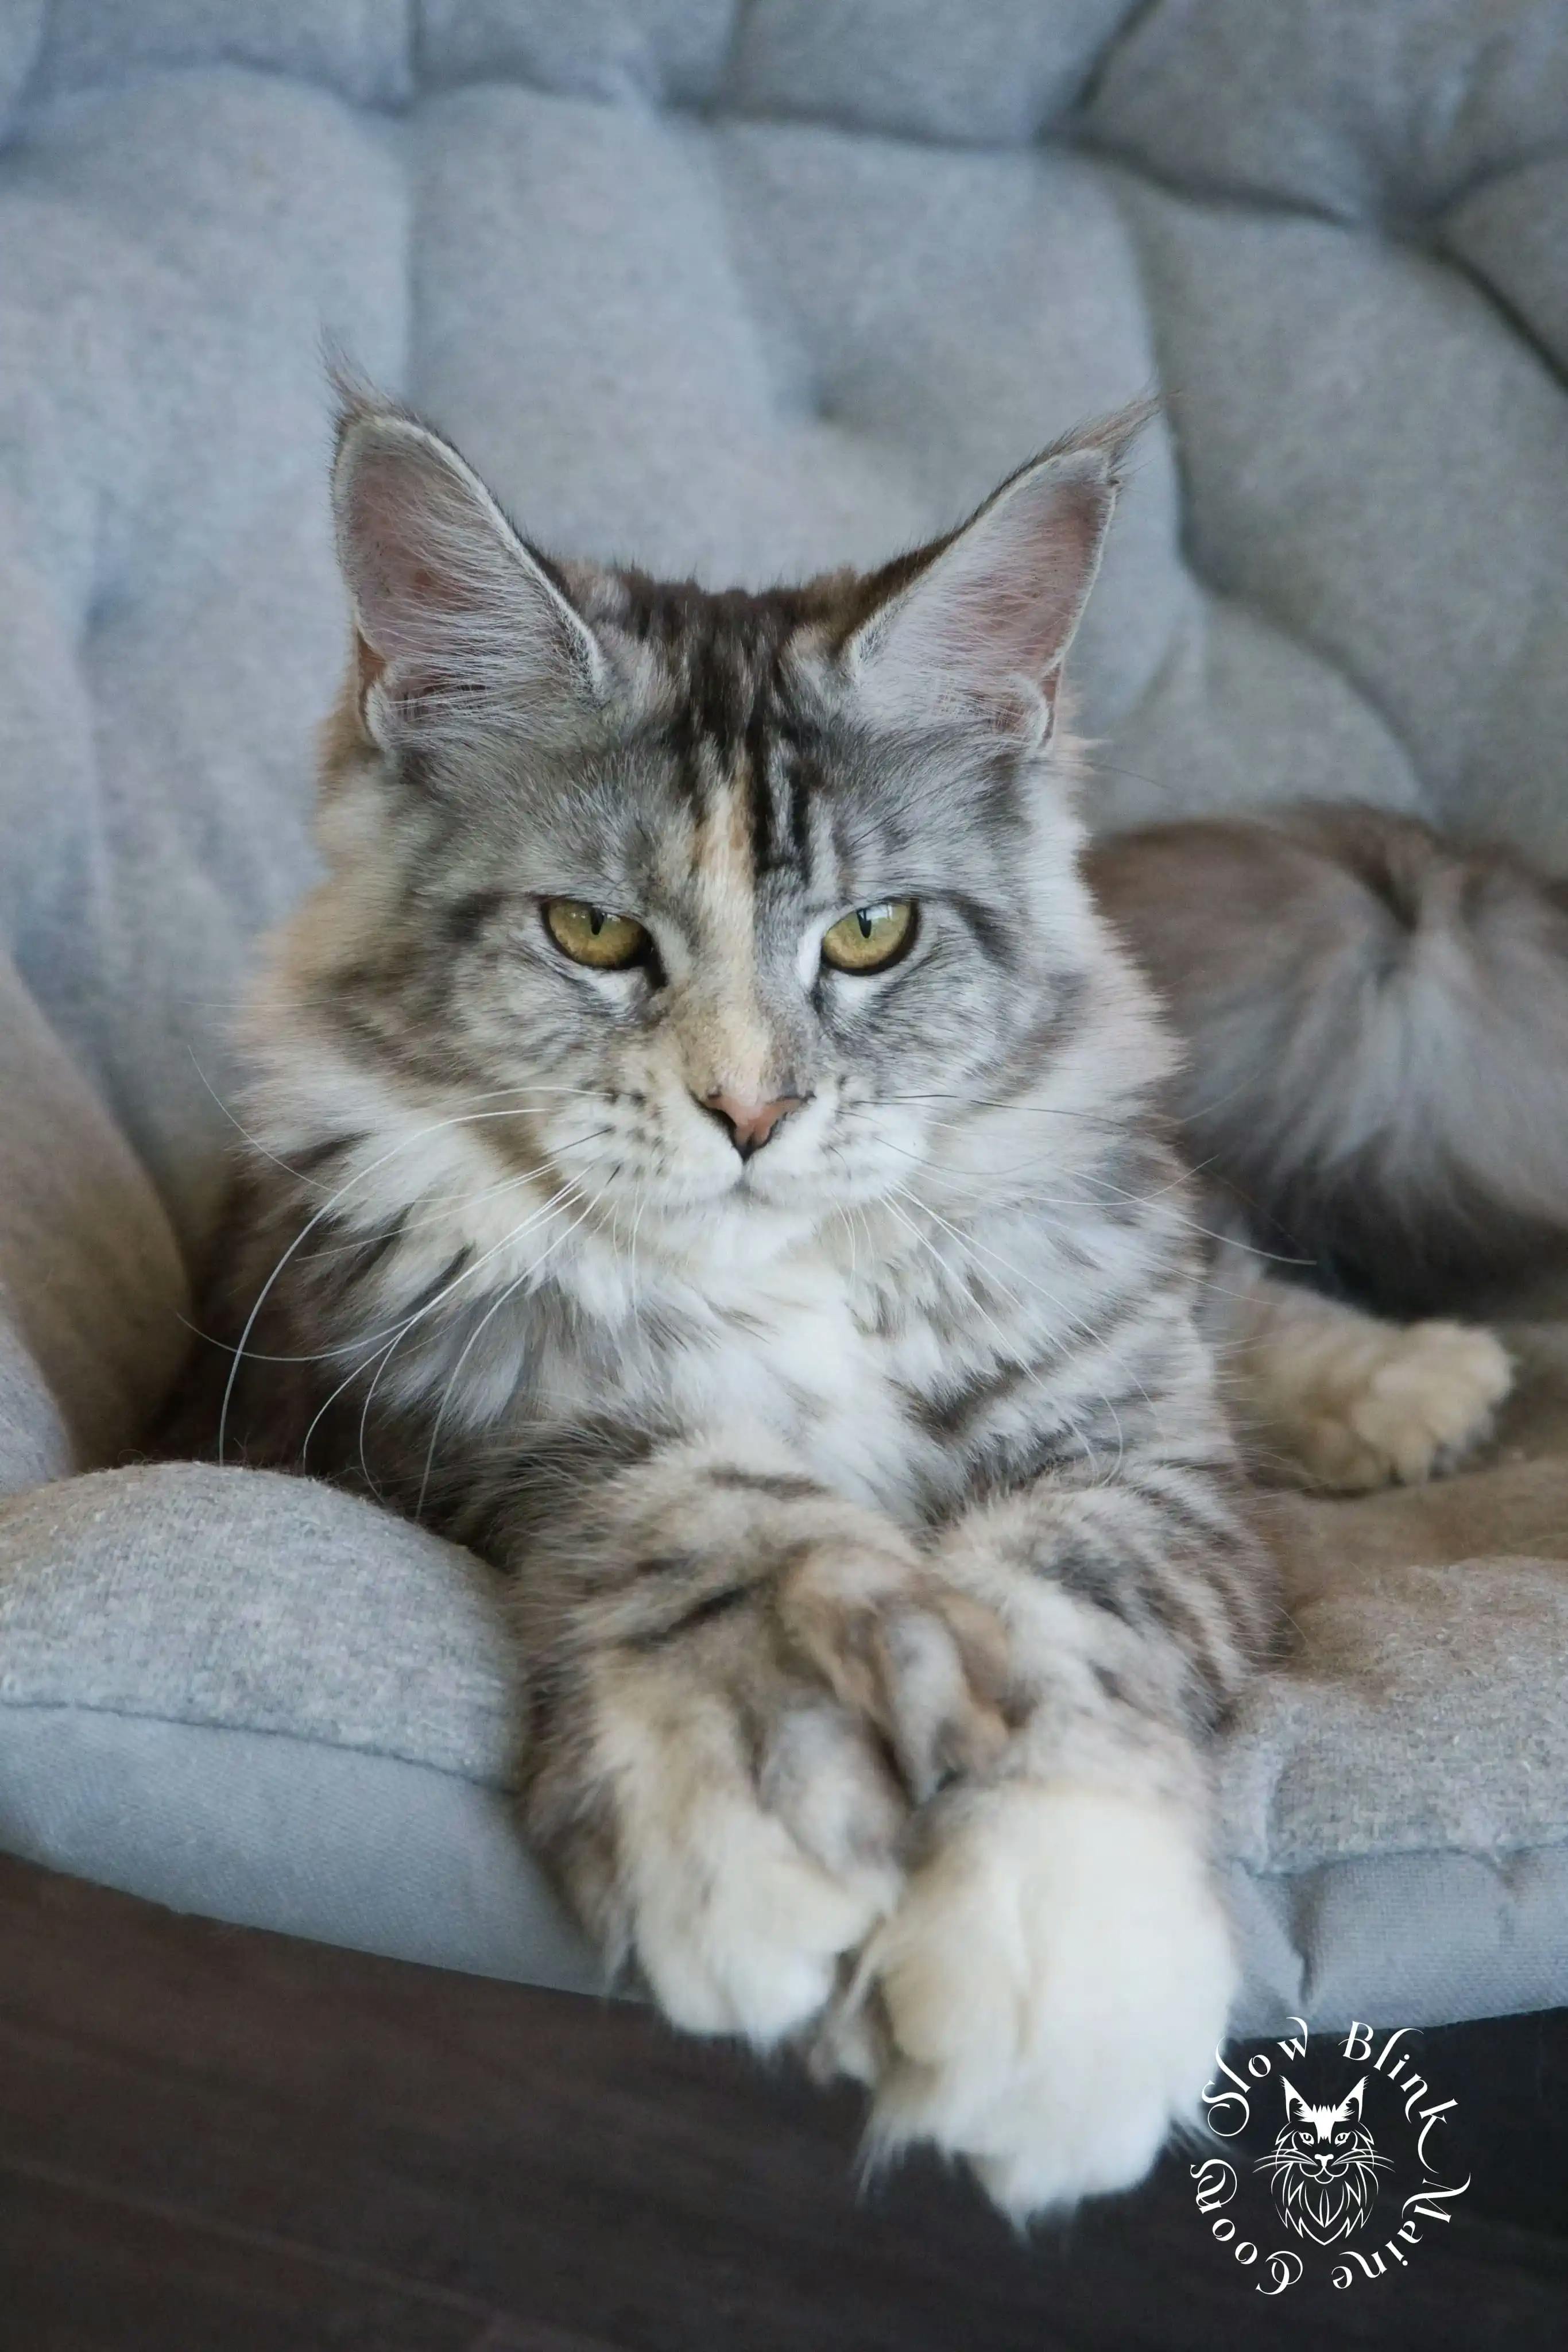 Adult Maine Coon Cat from SlowBlinkMaineCoons > ems code fs 25 | poly paws | split face | maine coon cat | aphrodite | 1 year old | maine coon queen at slowblink maine coons 2